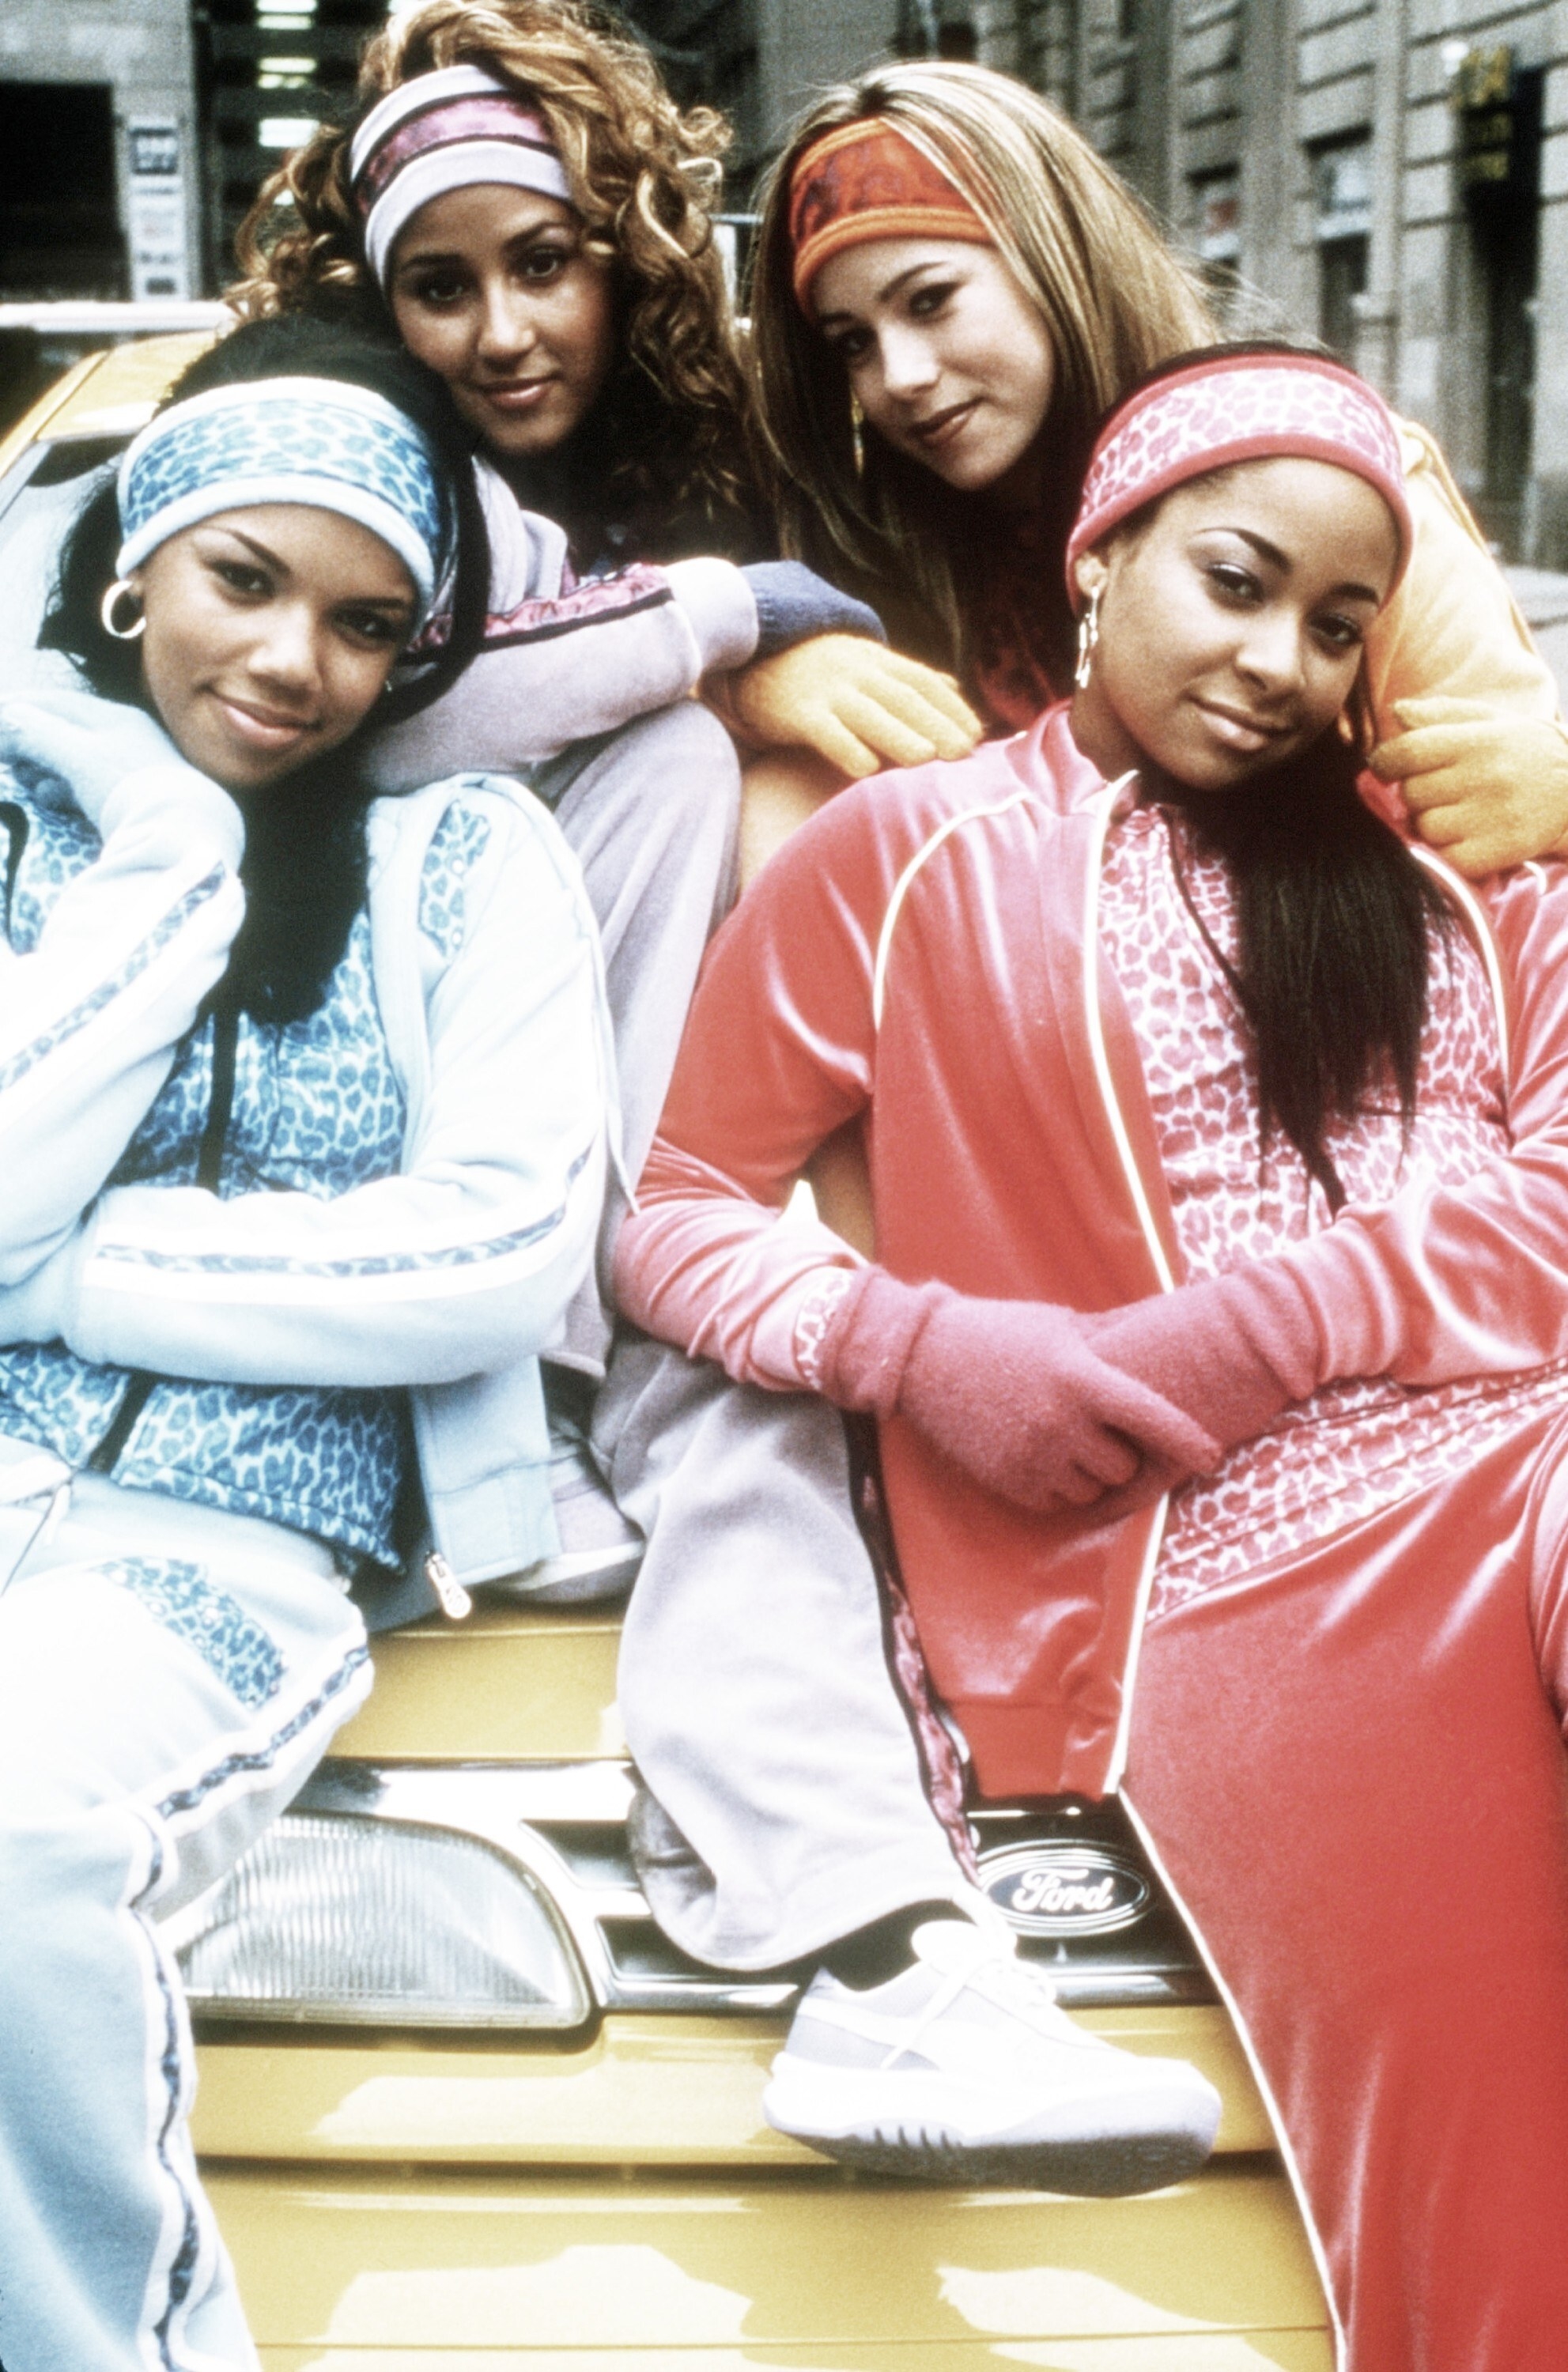 THE CHEETAH GIRLS, from left, Kiely Williams, Adrienne Houghton, Sabrina Bryan, Raven-Symone, aired August 15, 2003